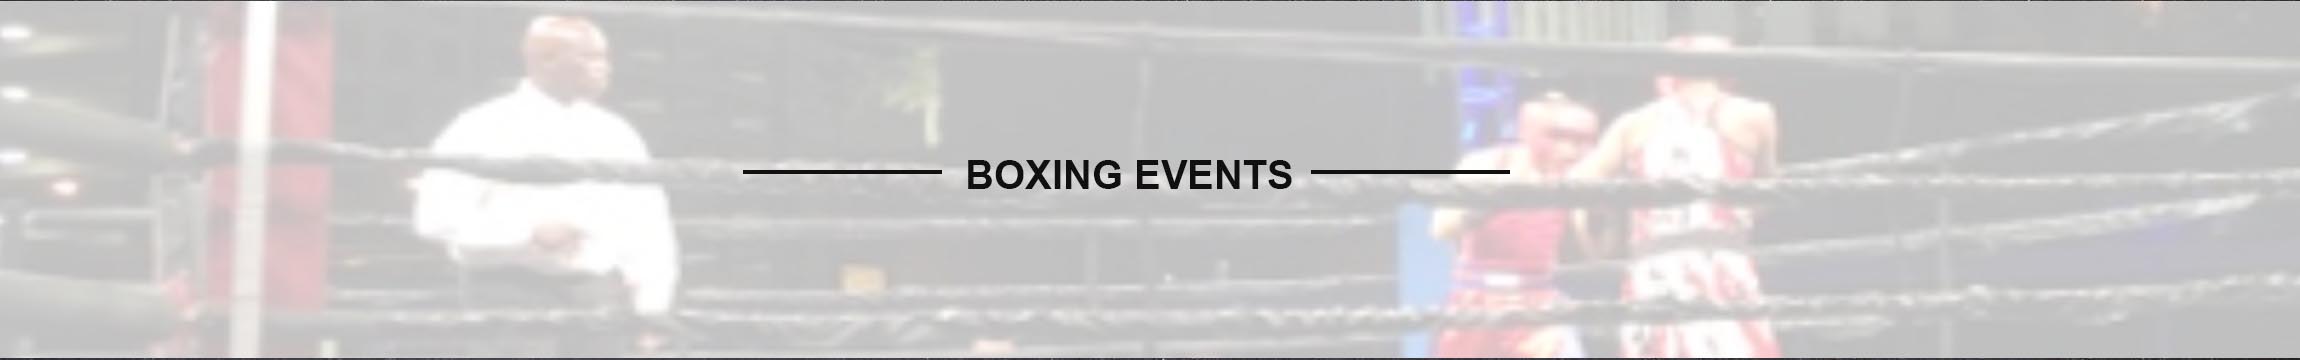 boxing-events-header